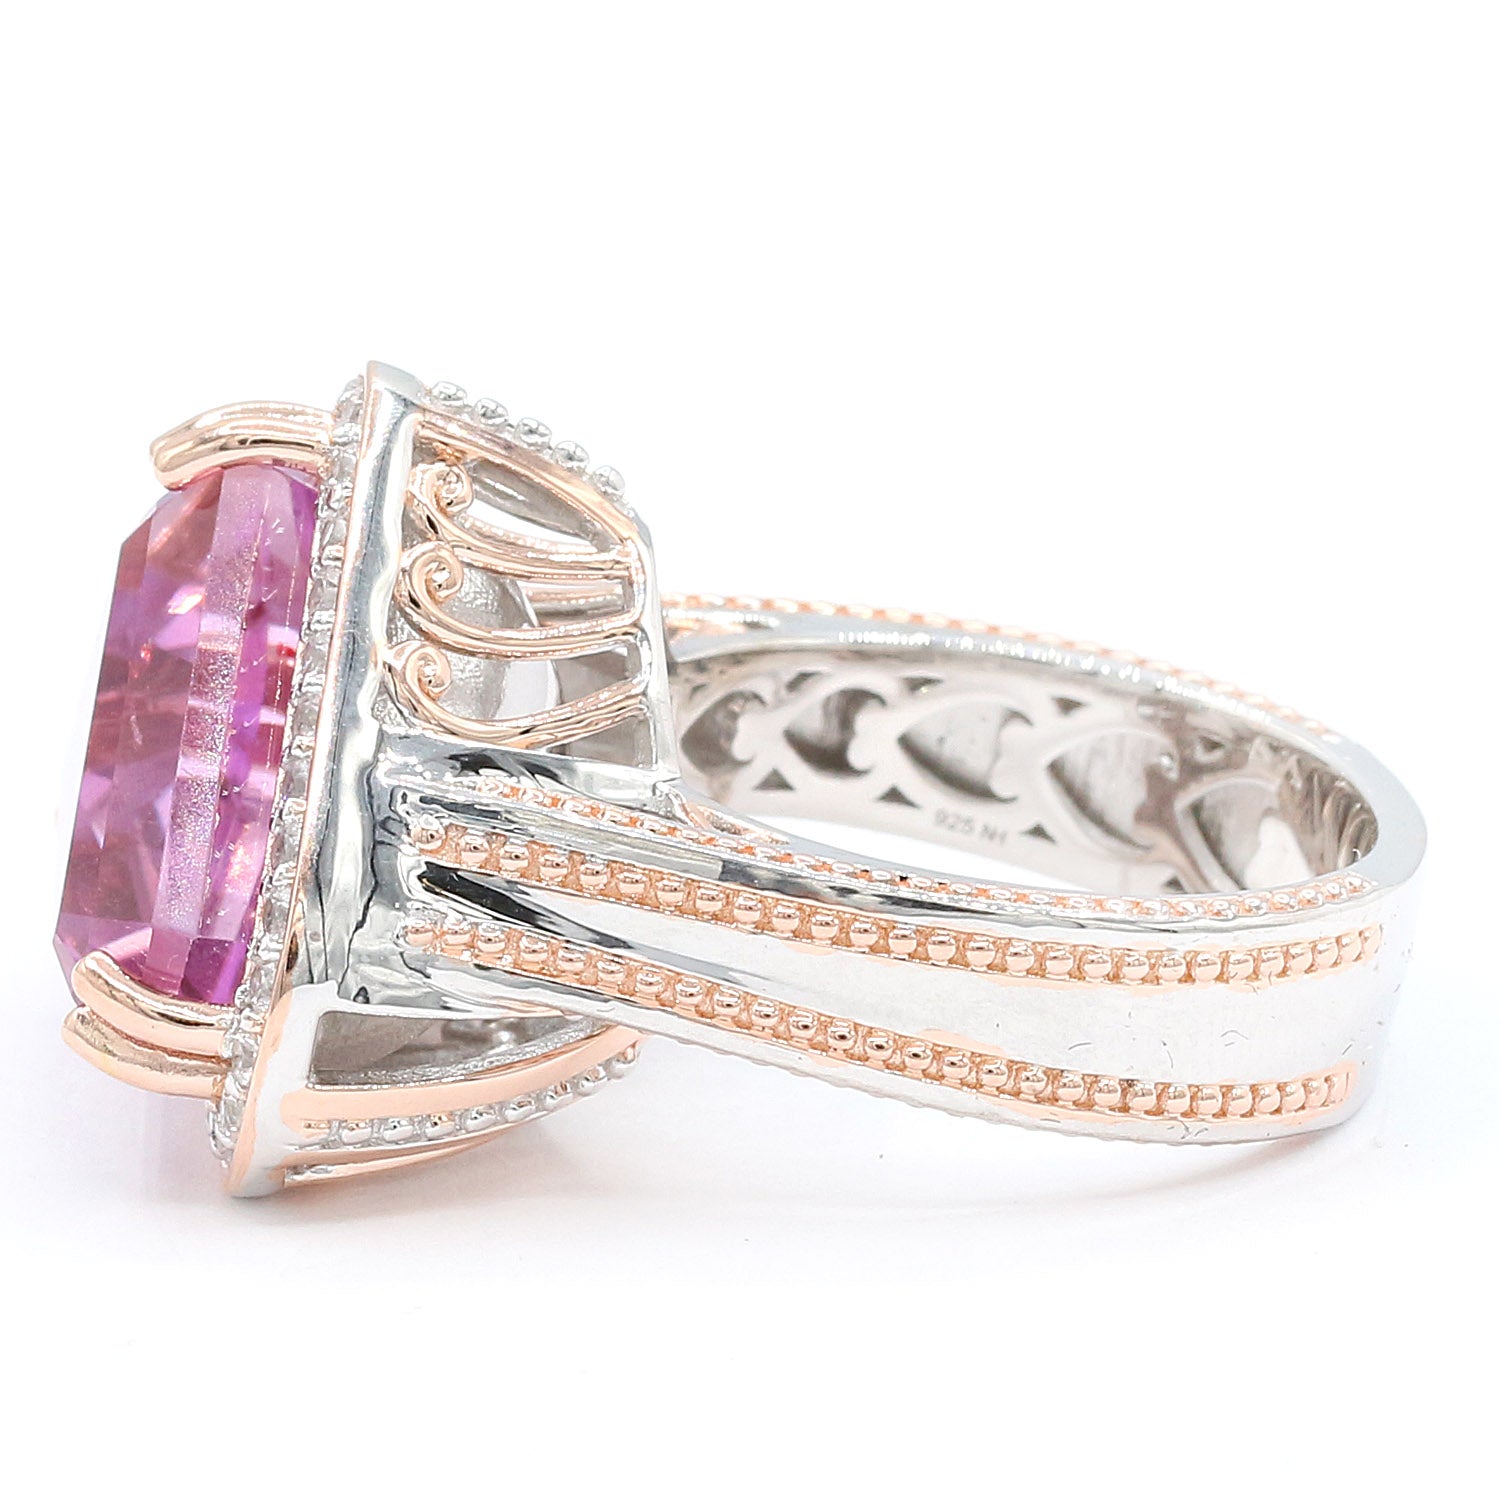 Limited Edition Gems en Vogue Luxe, One-of-a-Kind 15.43ctw Triangle Kunzite & White Zircon Ring